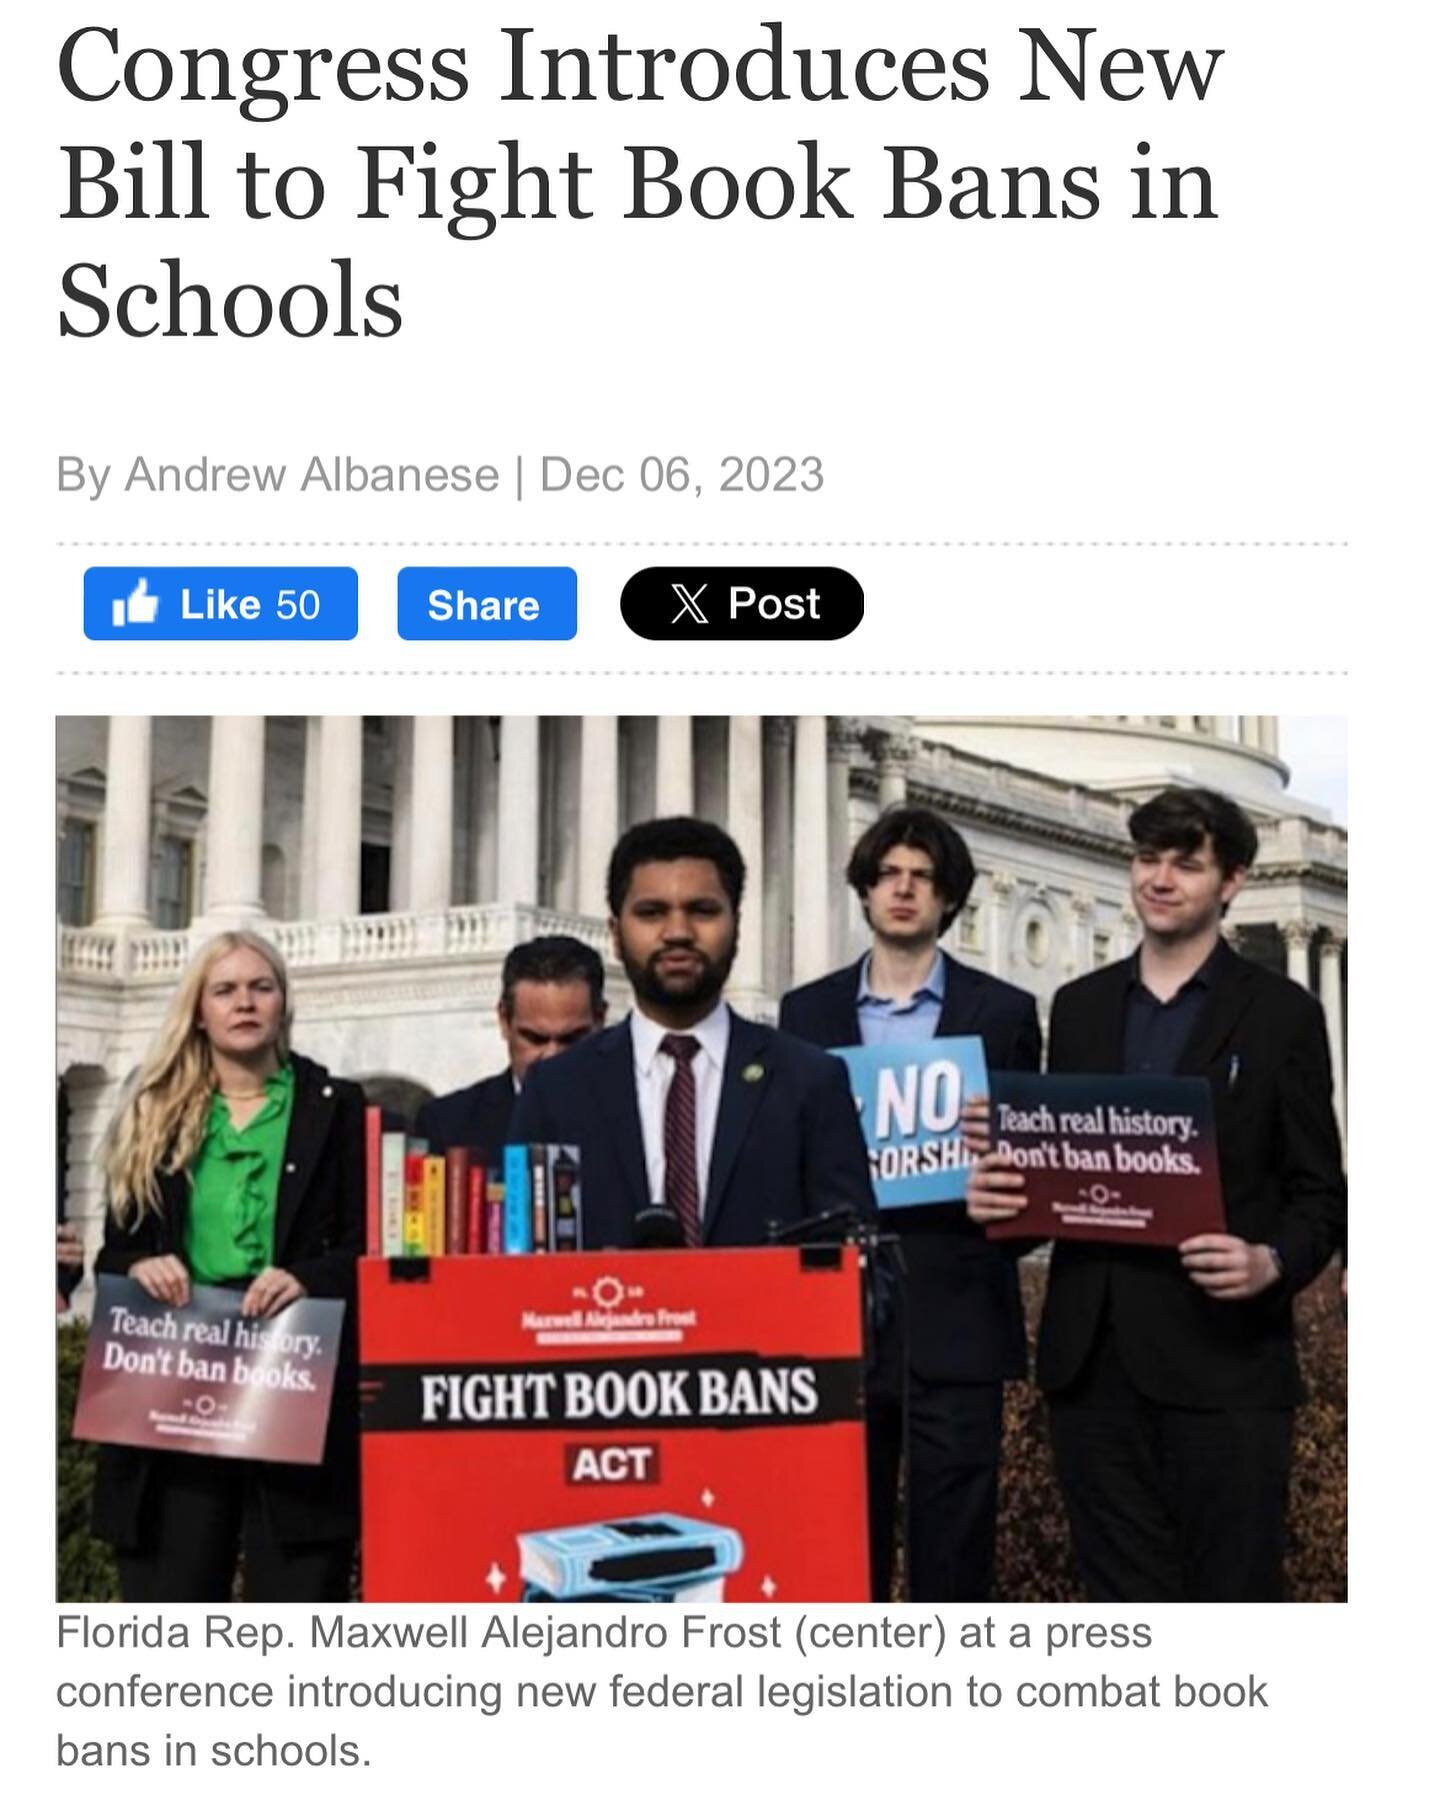 &ldquo;A group of Democratic members of Congress this week introduced new federal legislation aimed at combating the surge of book banning in schools. Introduced on December 5 by Florida&rsquo;s Maxwell Alejandro Frost and Frederica Wilson, and Maryl